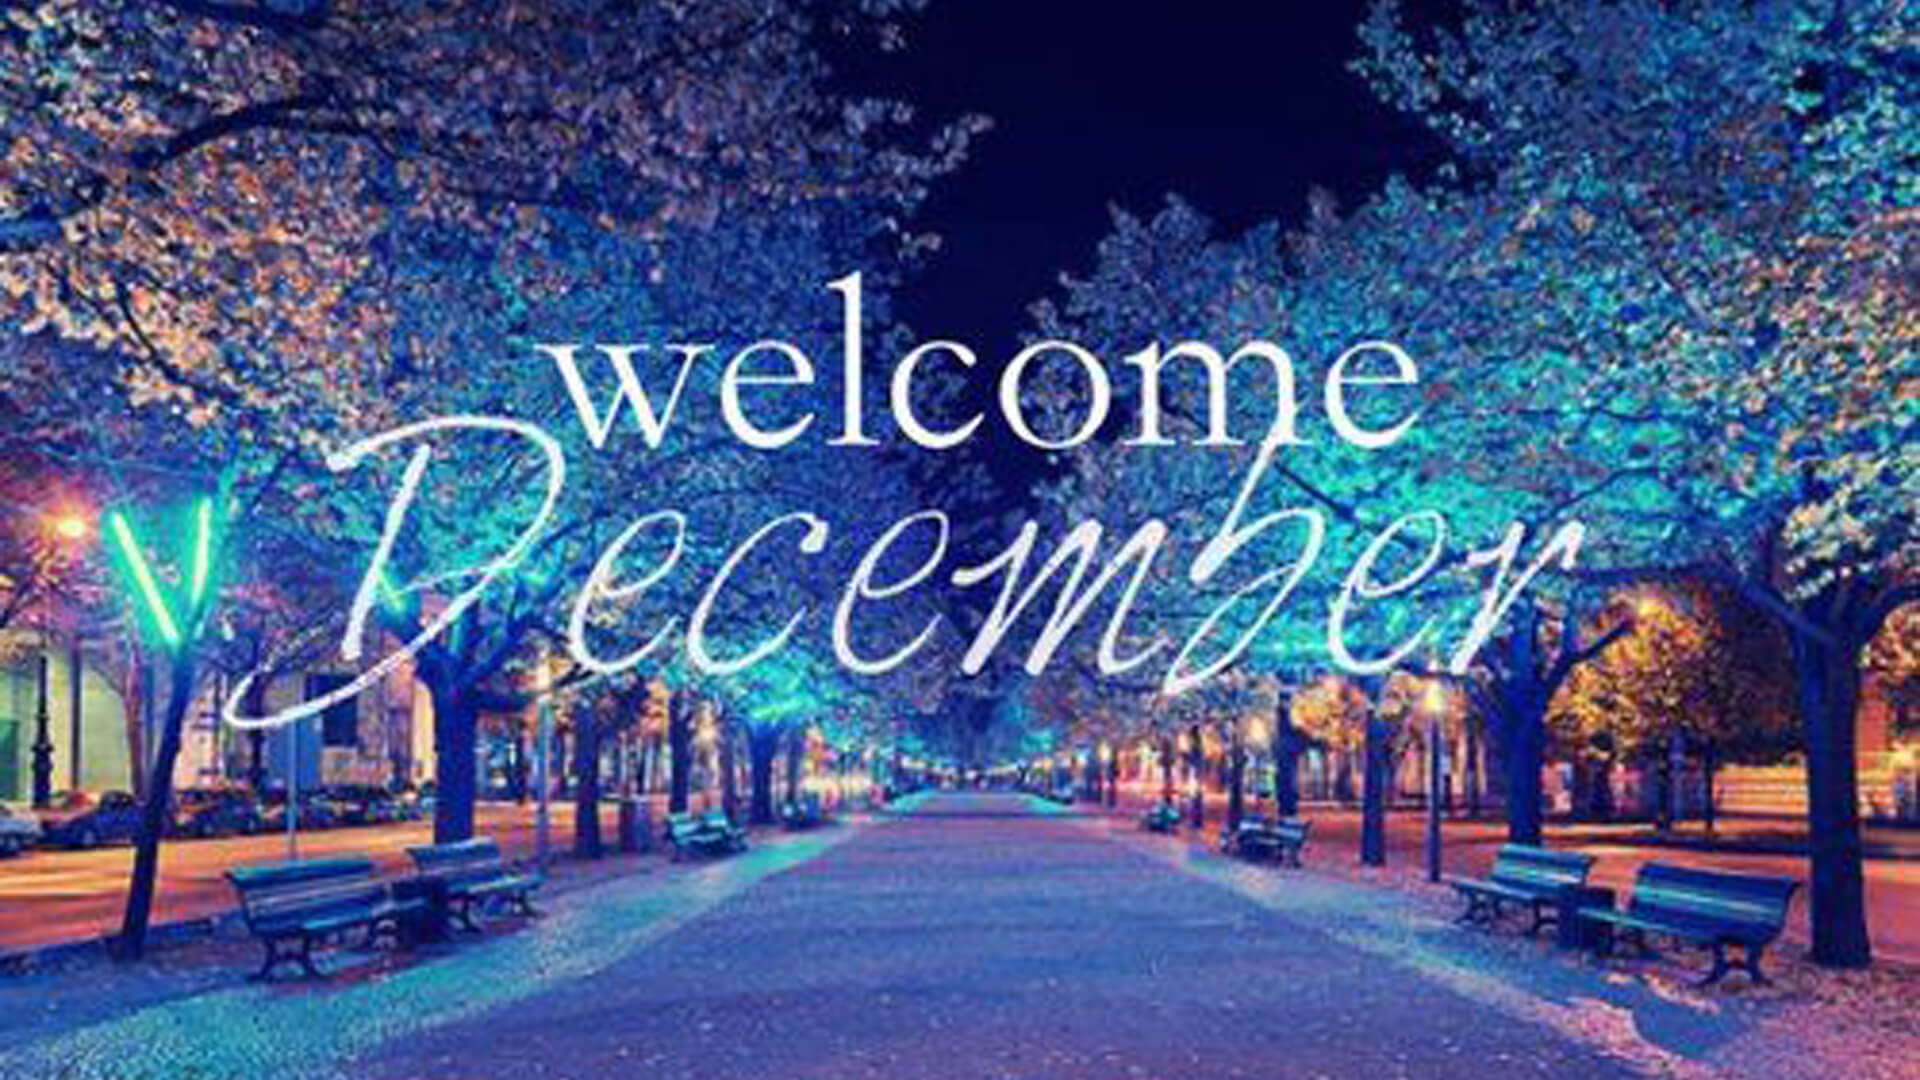 Welcome December Picture For Facebook